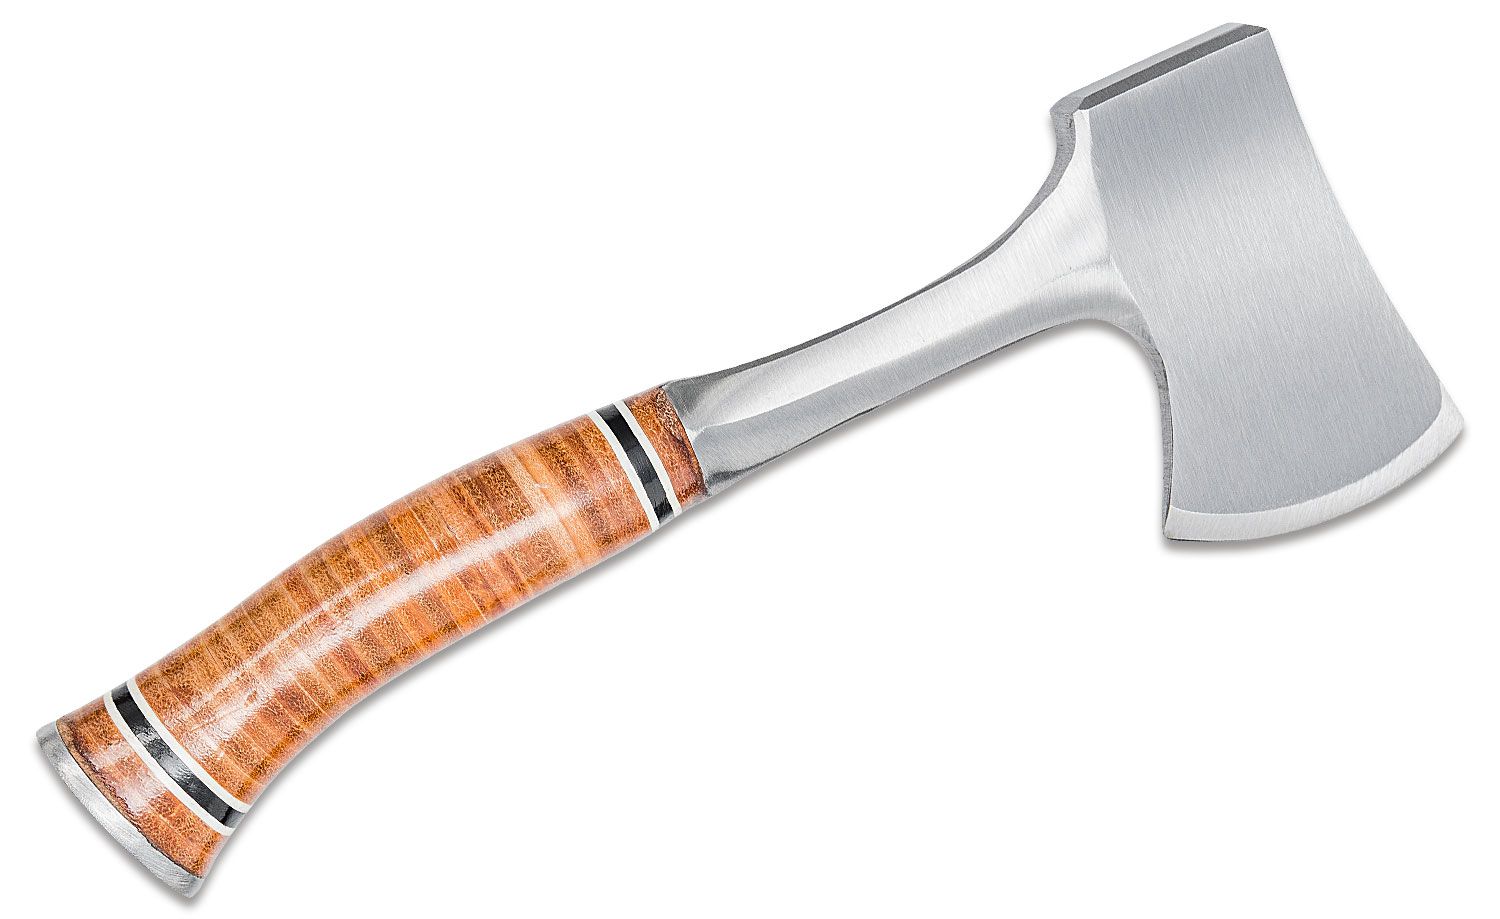 Estwing Sportsman Axe 11 5 Overall, Estwing Leather Sportsman’s Axe